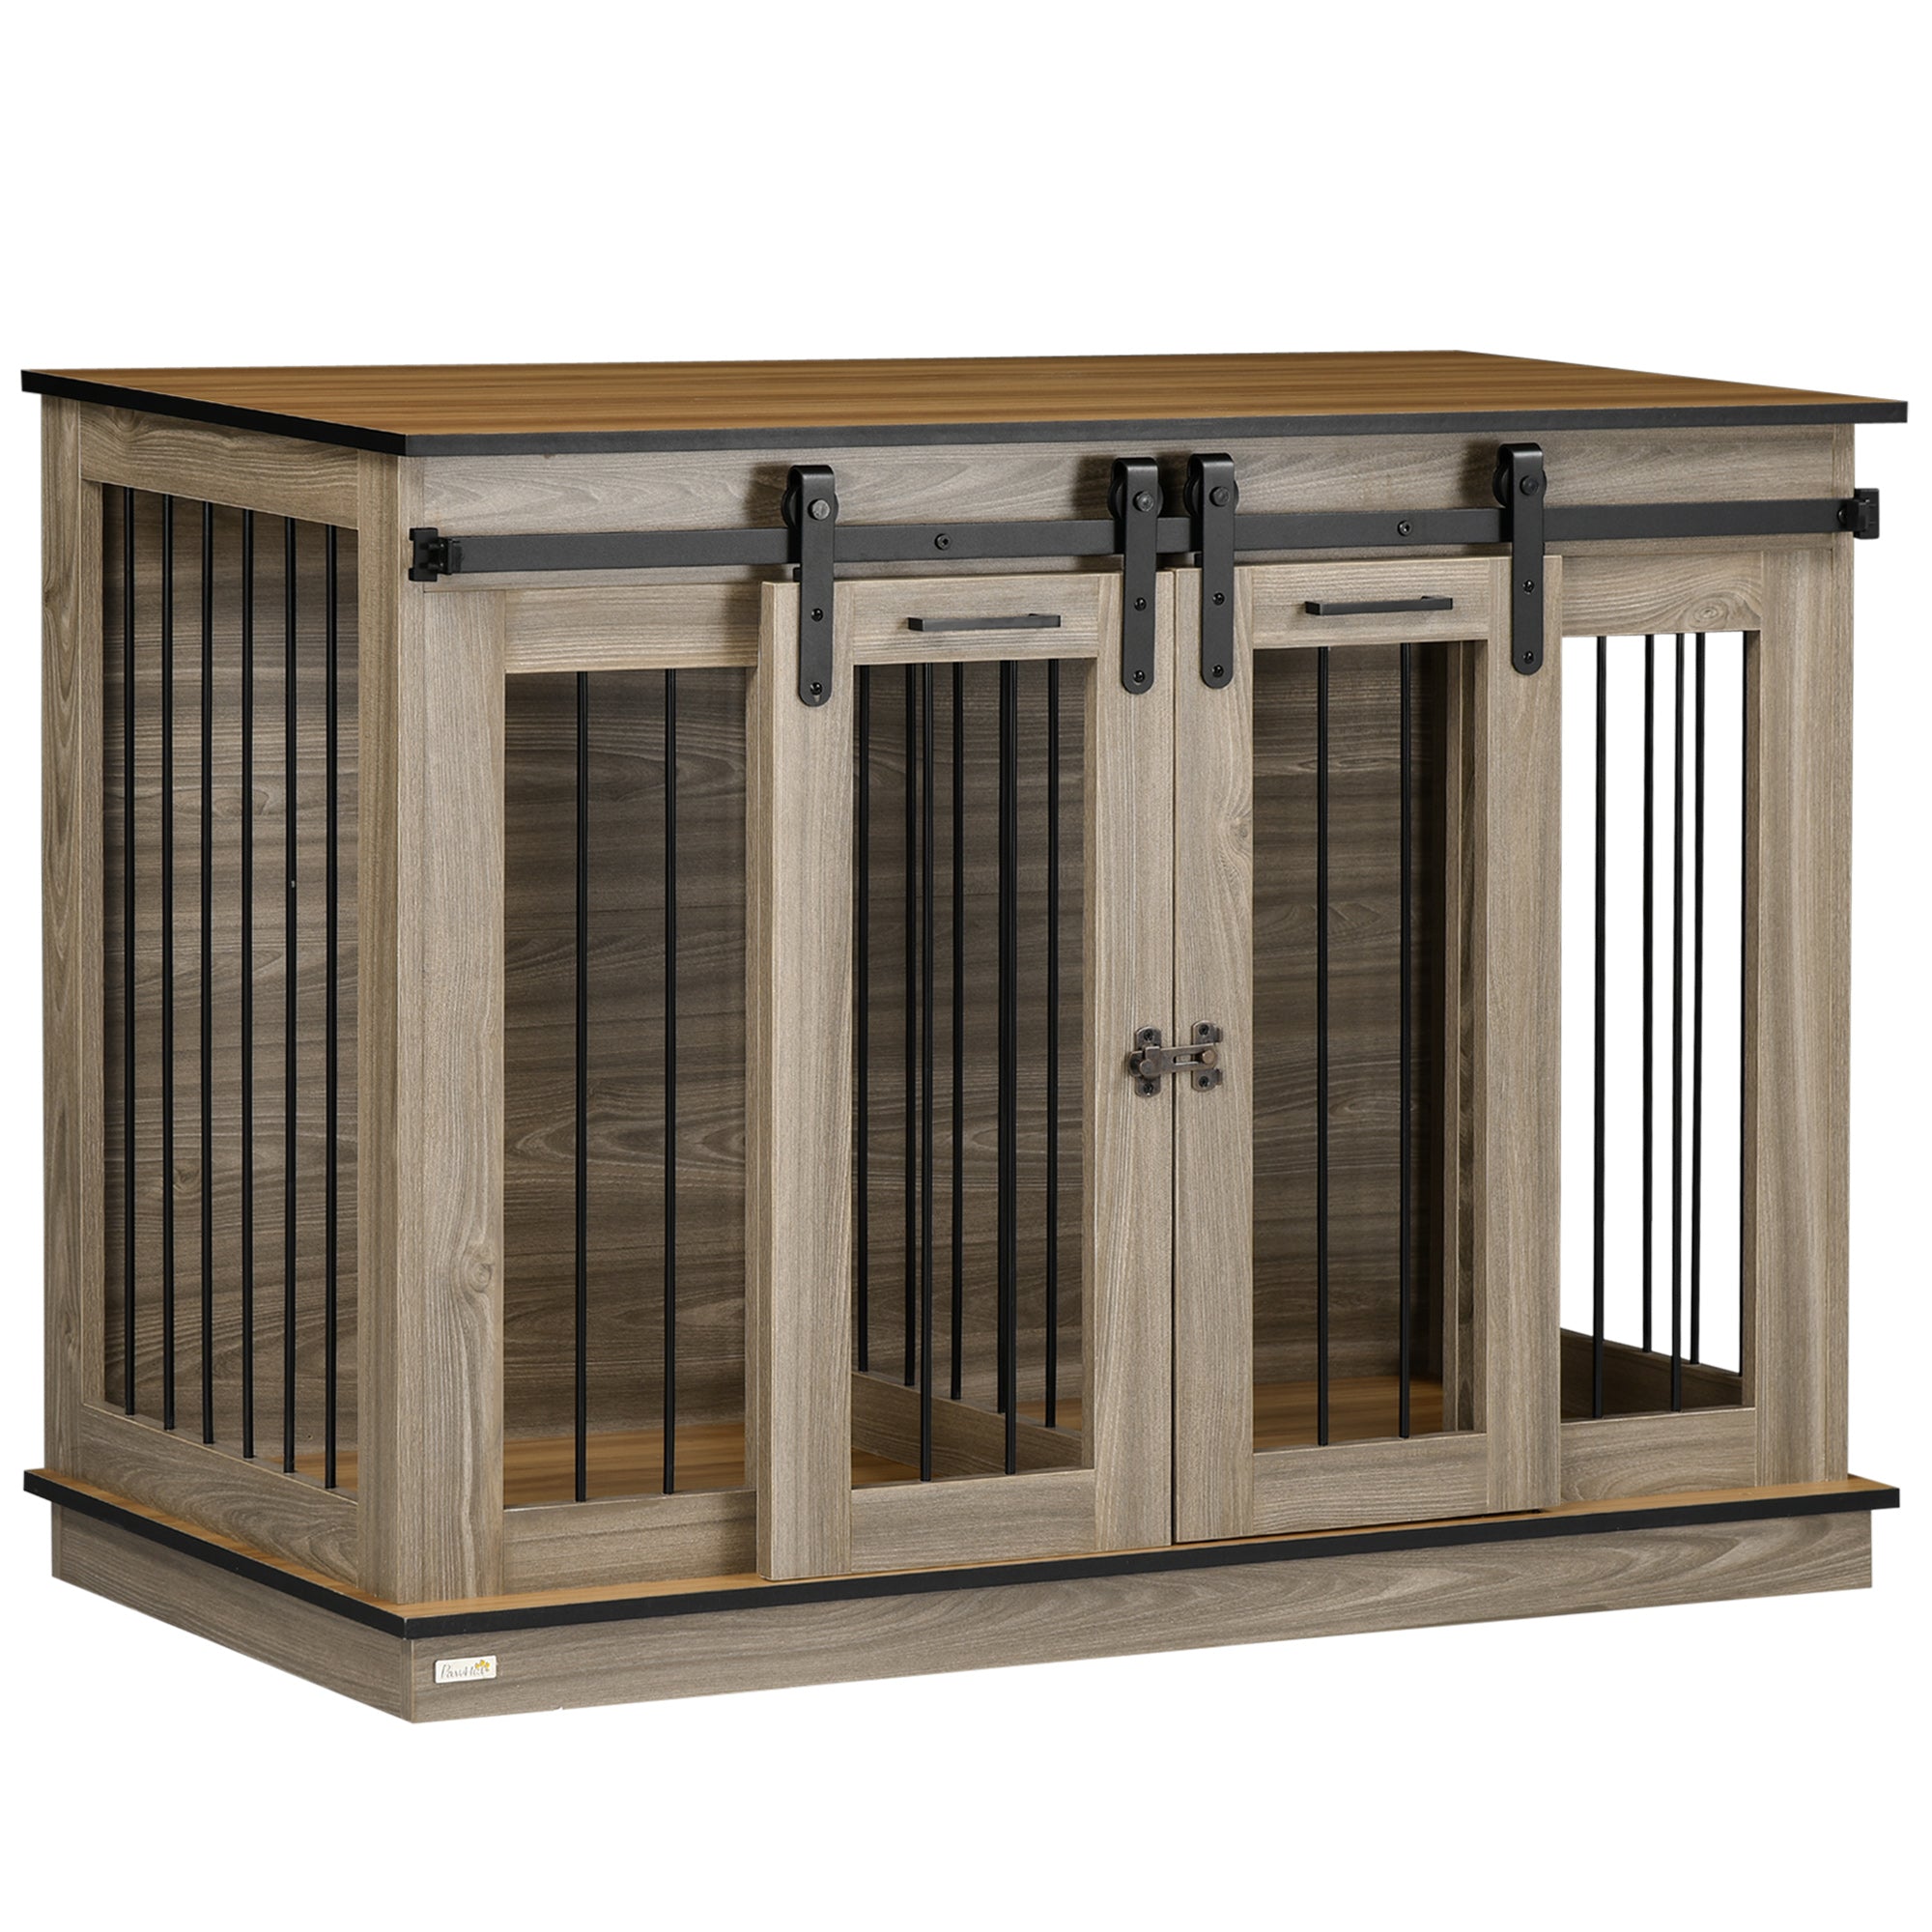 PawHut Dog Crate for Large Dogs - Double Dog Cage for Small Dog - Oak Tone  | TJ Hughes White